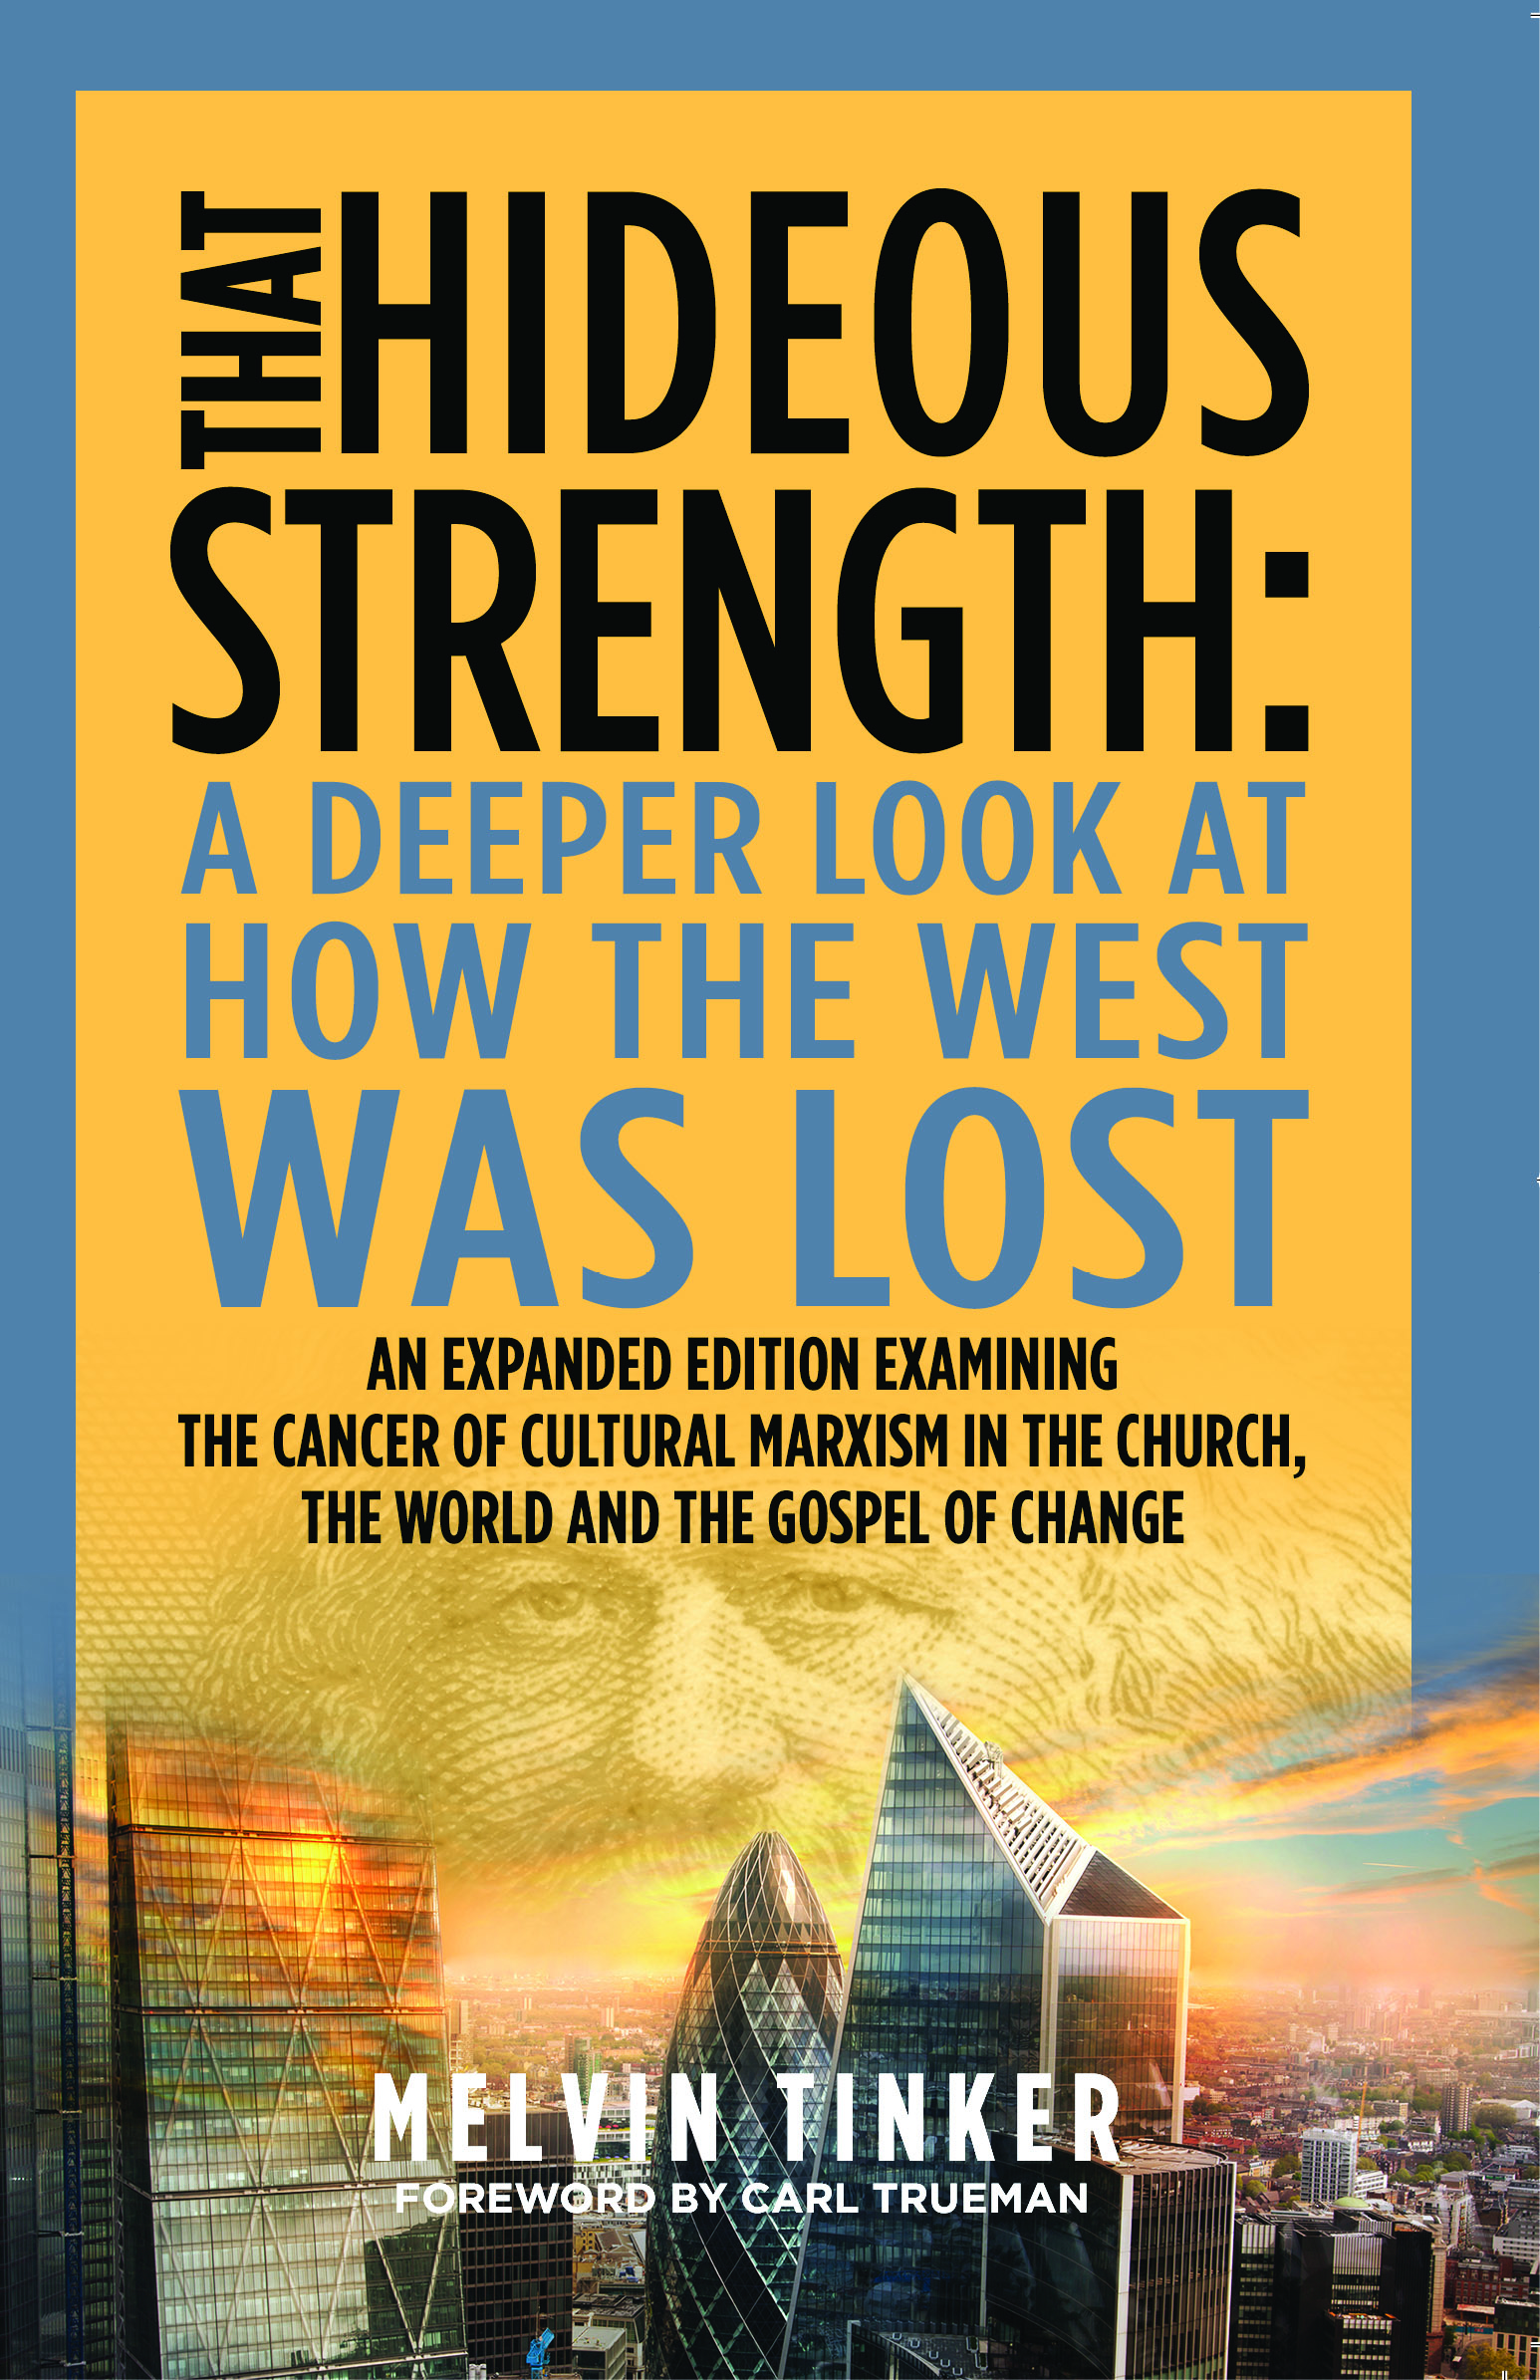 Book Notice: THAT HIDEOUS STRENGTH: A DEEPER LOOK AT HOW THE WEST WAS LOST, AN EXPANDED EDITION EXAMINING THE CANCER OF CULTURAL MARXISM IN THE CHURCH, THE WORLD, AND THE GOSPEL OF CHANGE, by Melvin Tinker